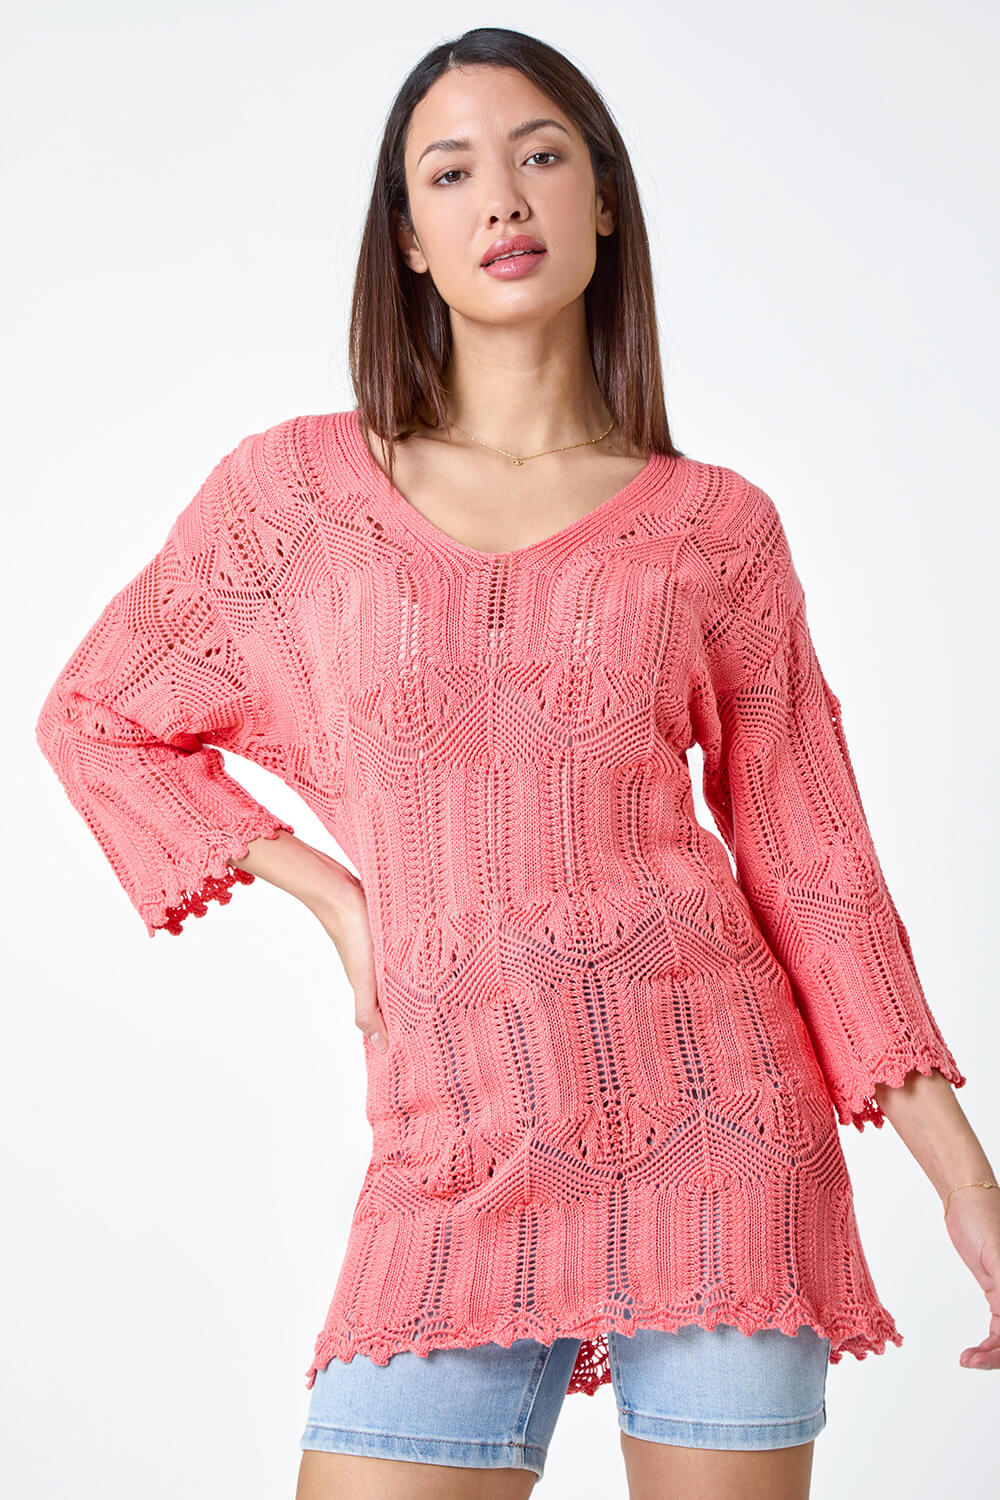 CORAL Open Knit Cotton Blend Tunic Top, Image 2 of 5